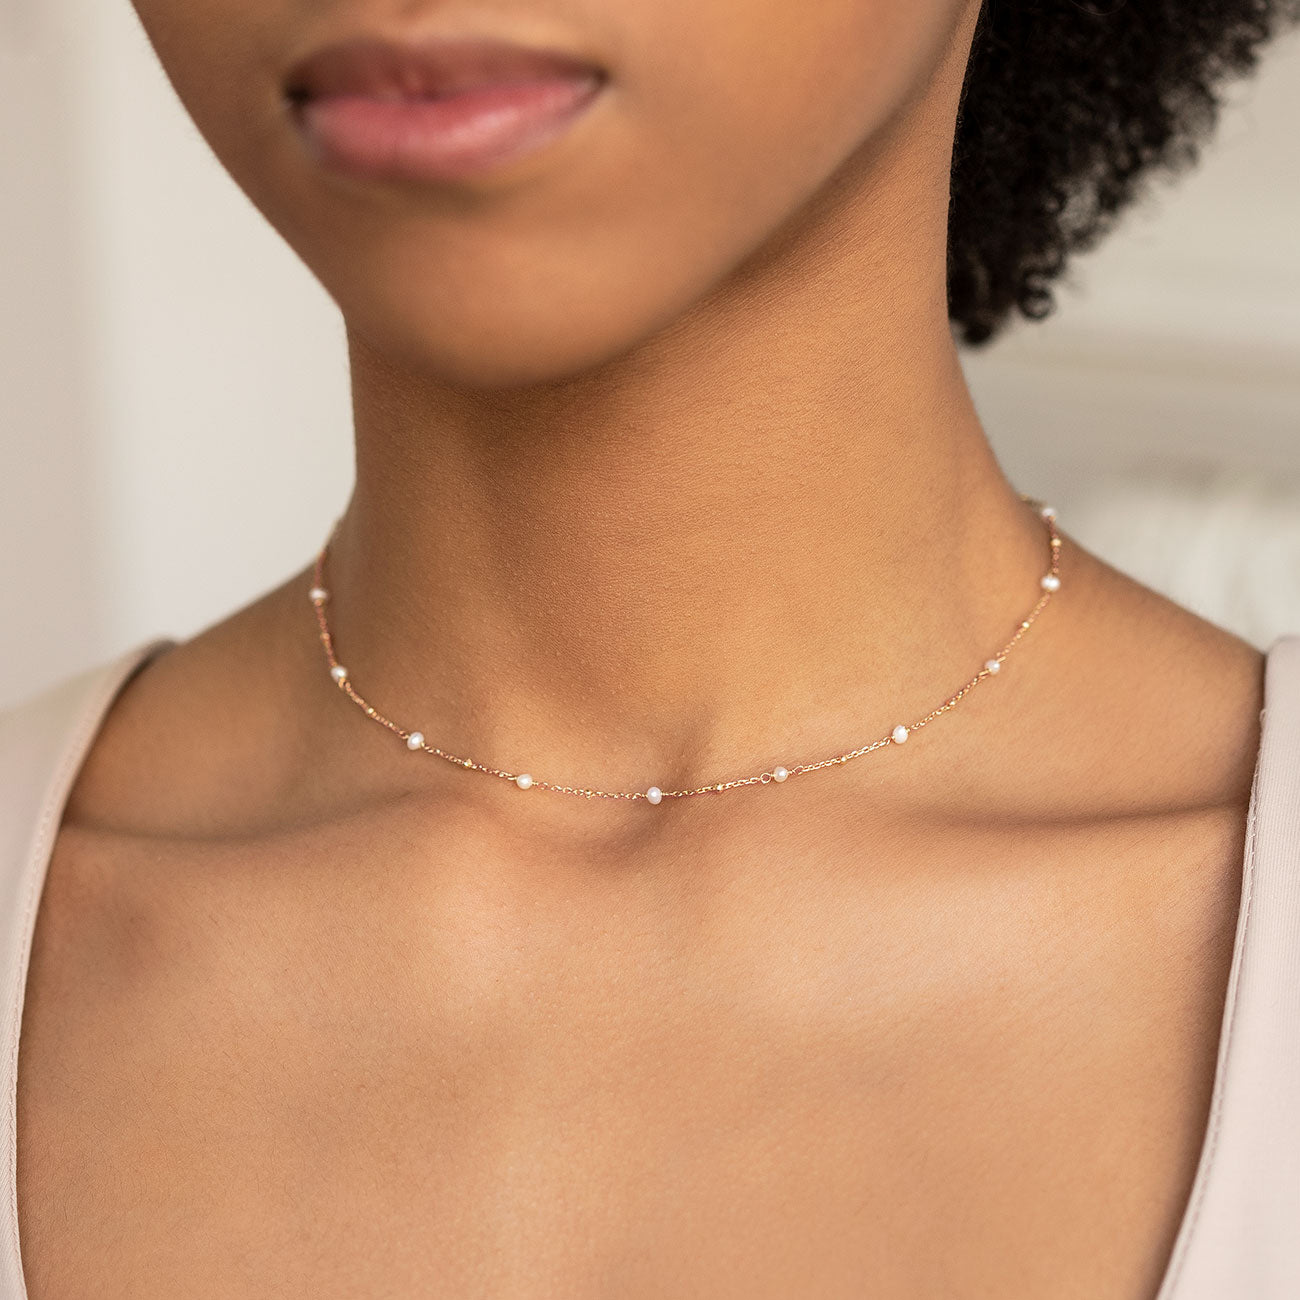 Vintage Pearl Choker Necklace Luxury Multilayer With Crystal Gem Pendant  Scenic | eBay